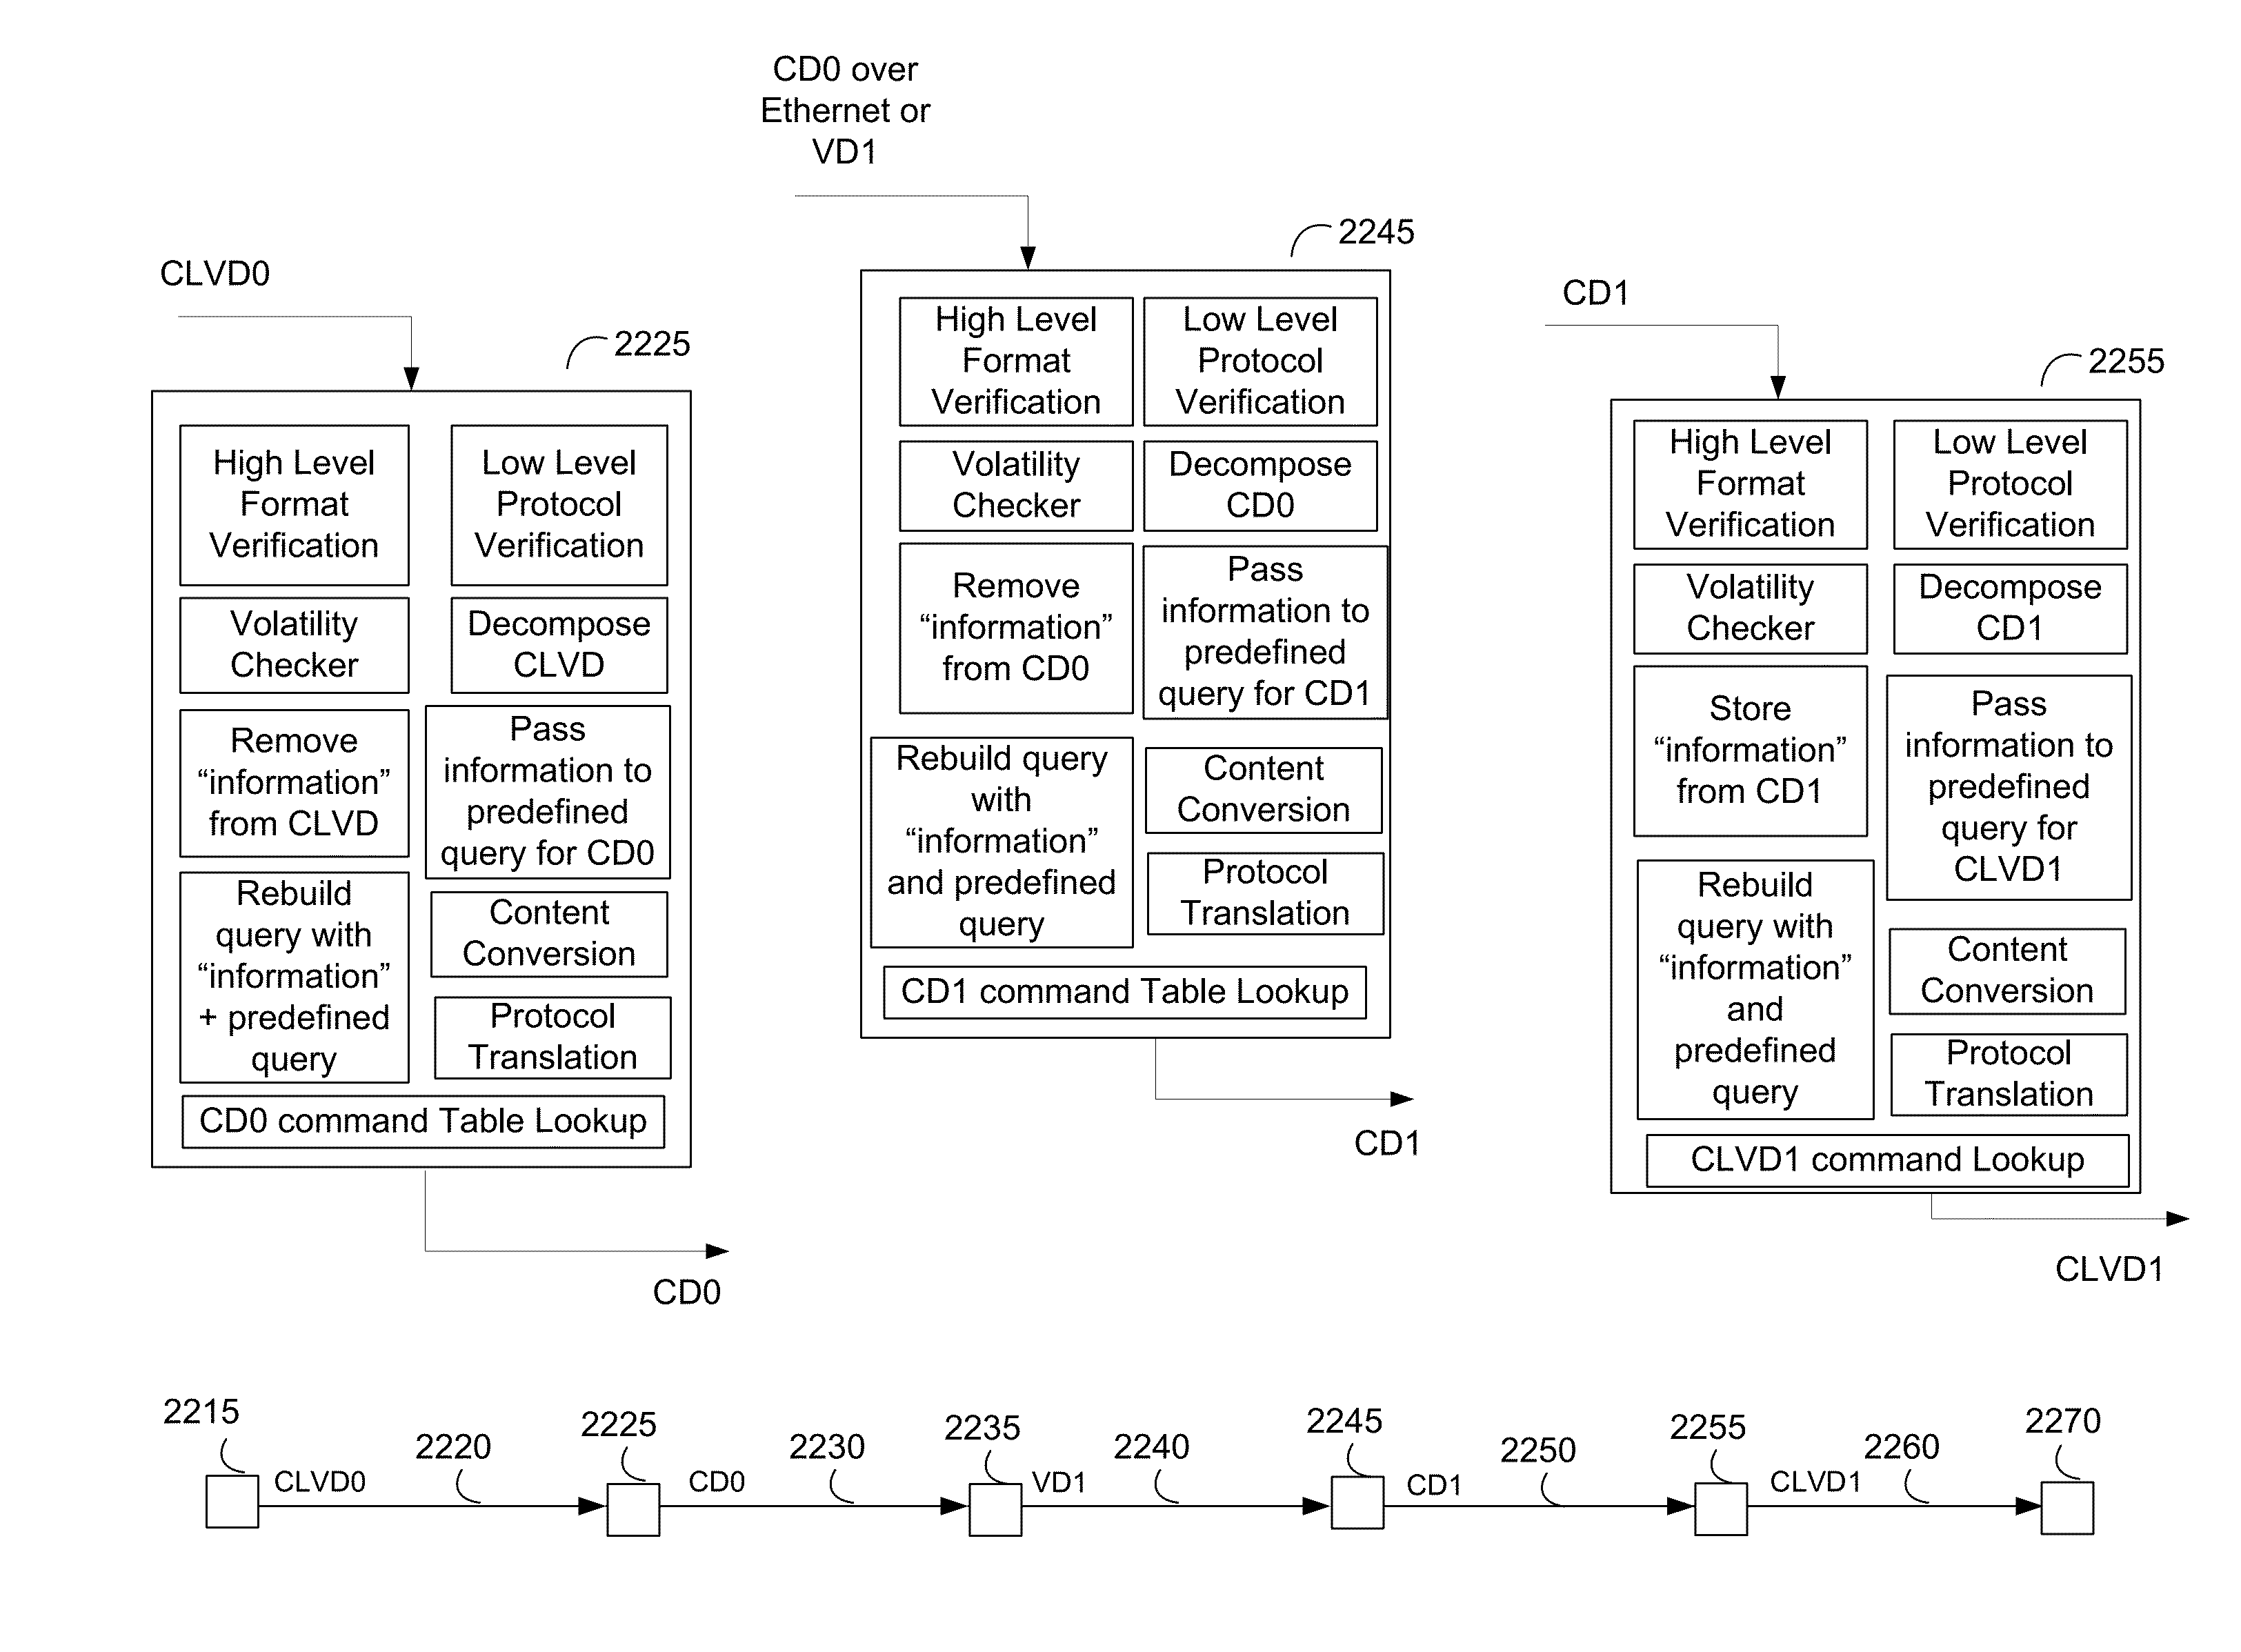 System and associated methods for secure communications